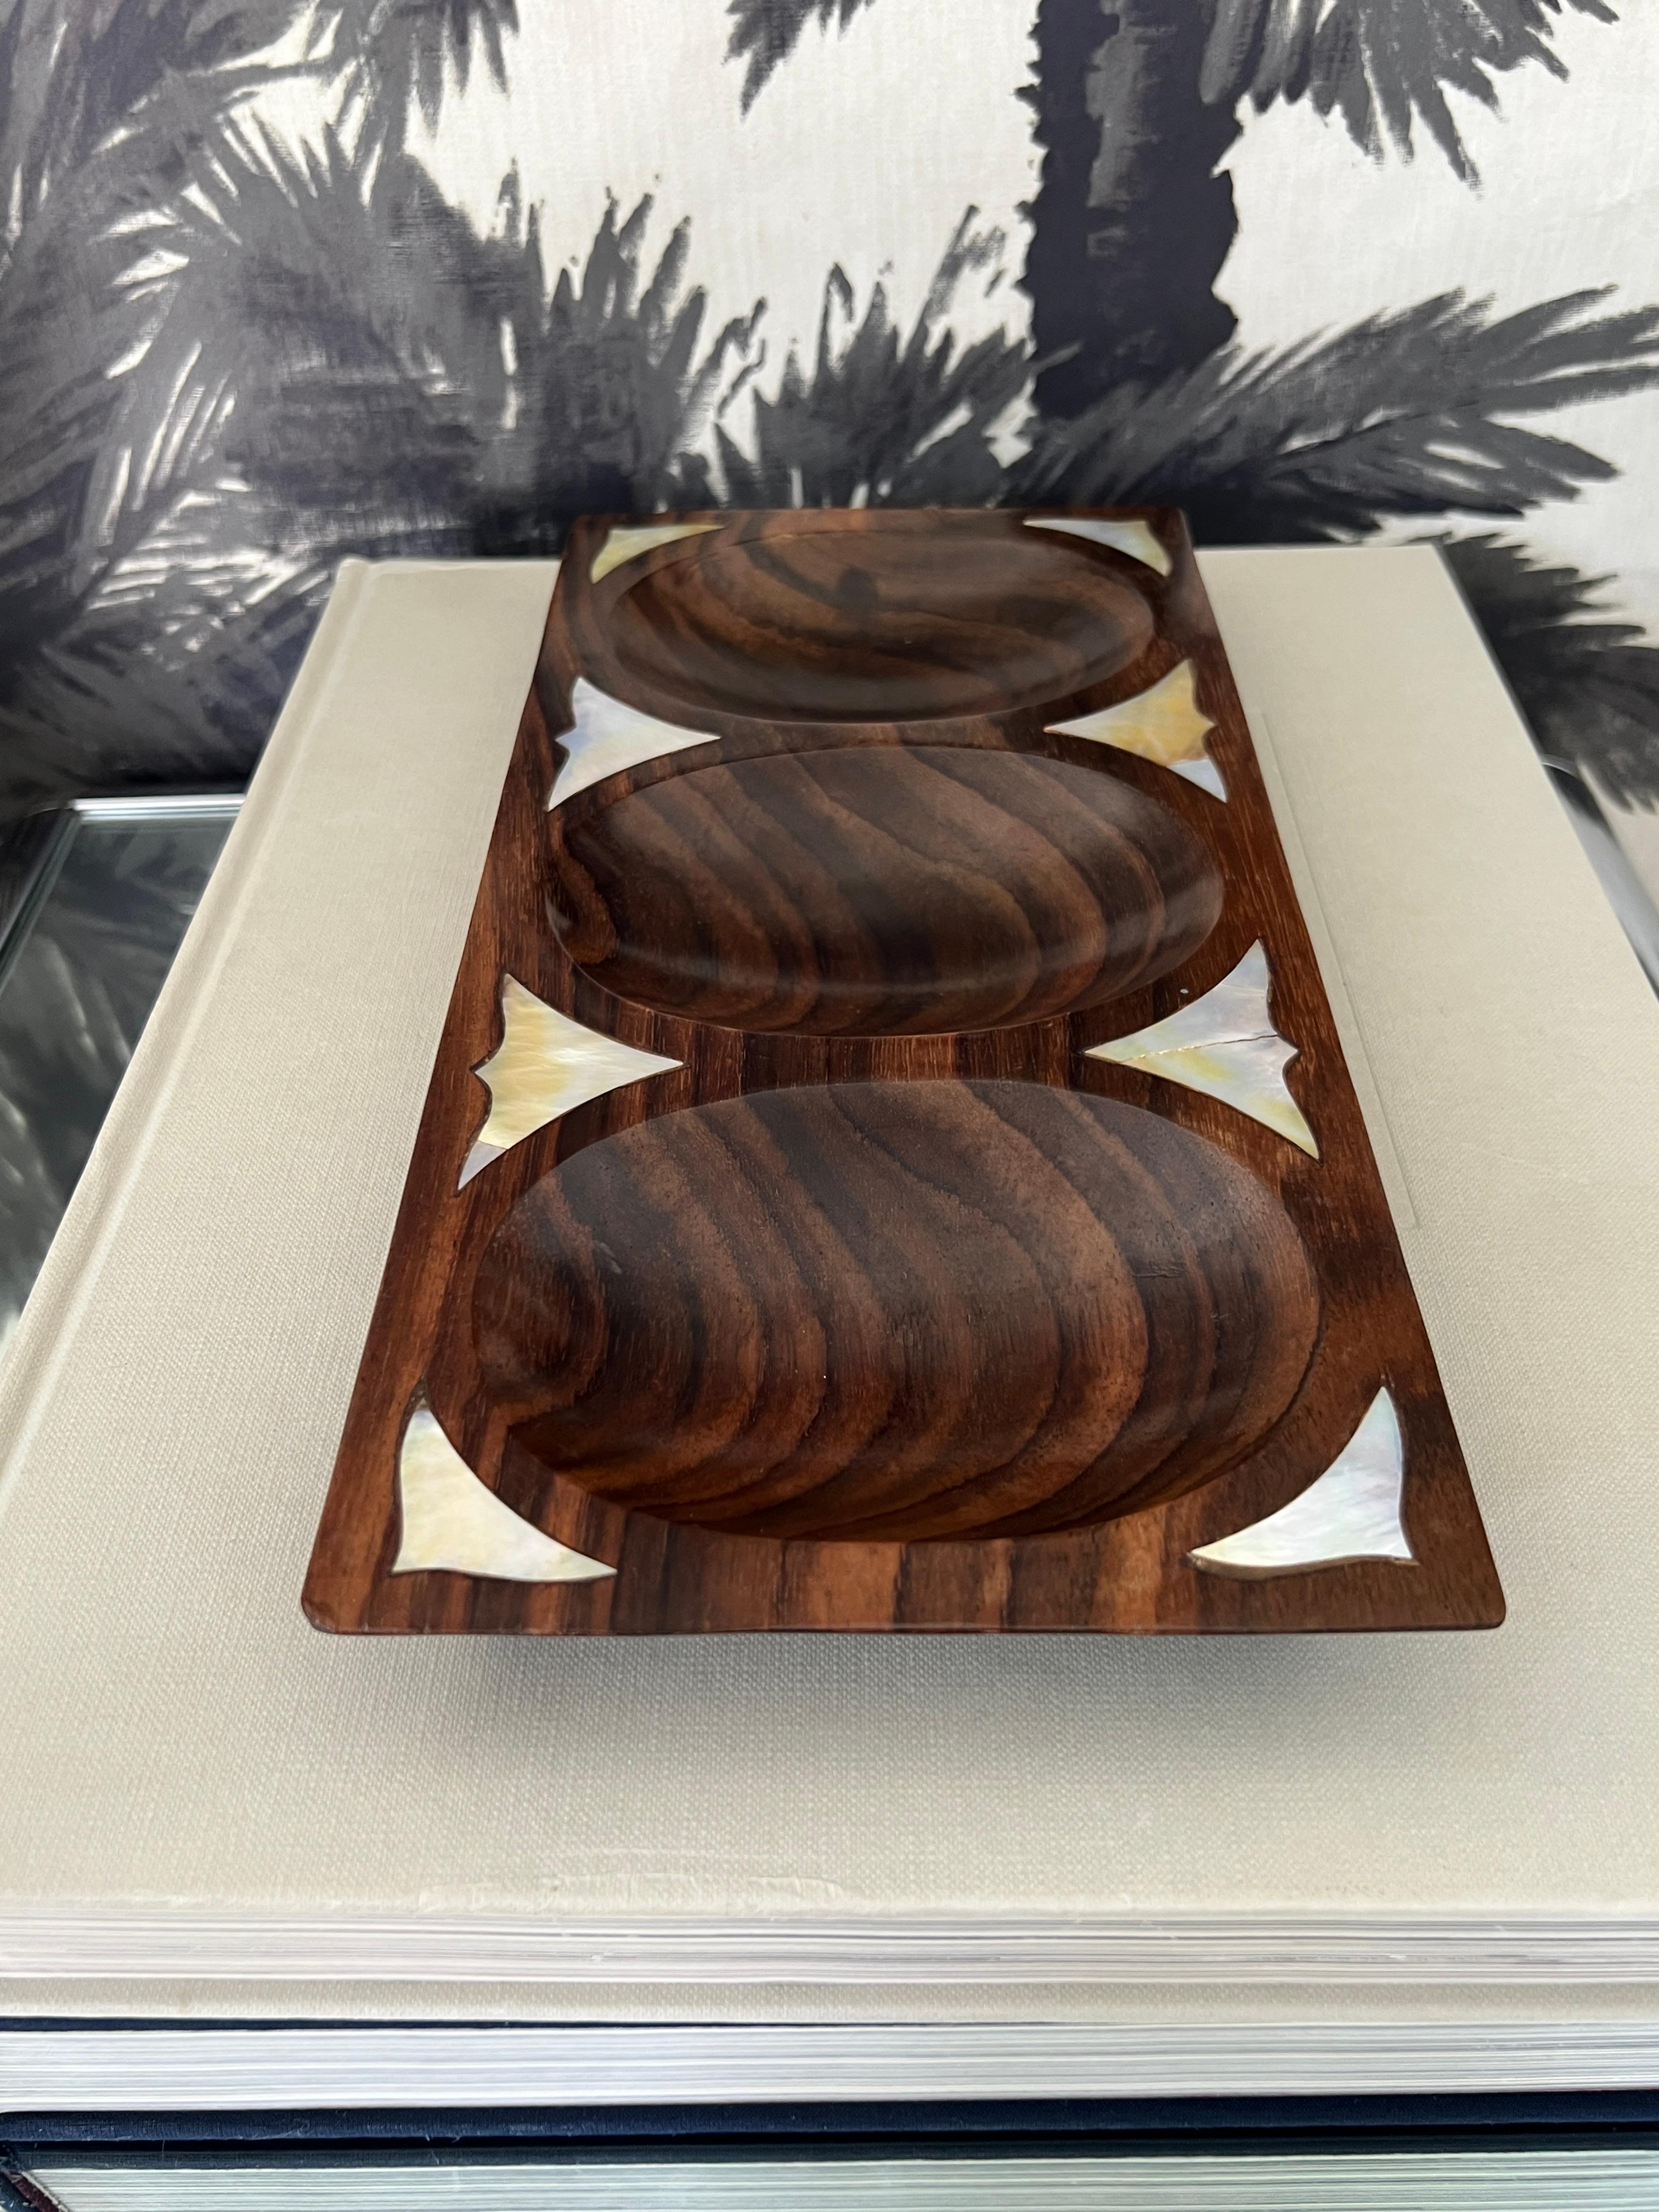 Danish Modern Divided Tray in Rosewood with Mother of Pearl Inlays, c. 1960's In Good Condition For Sale In Fort Lauderdale, FL